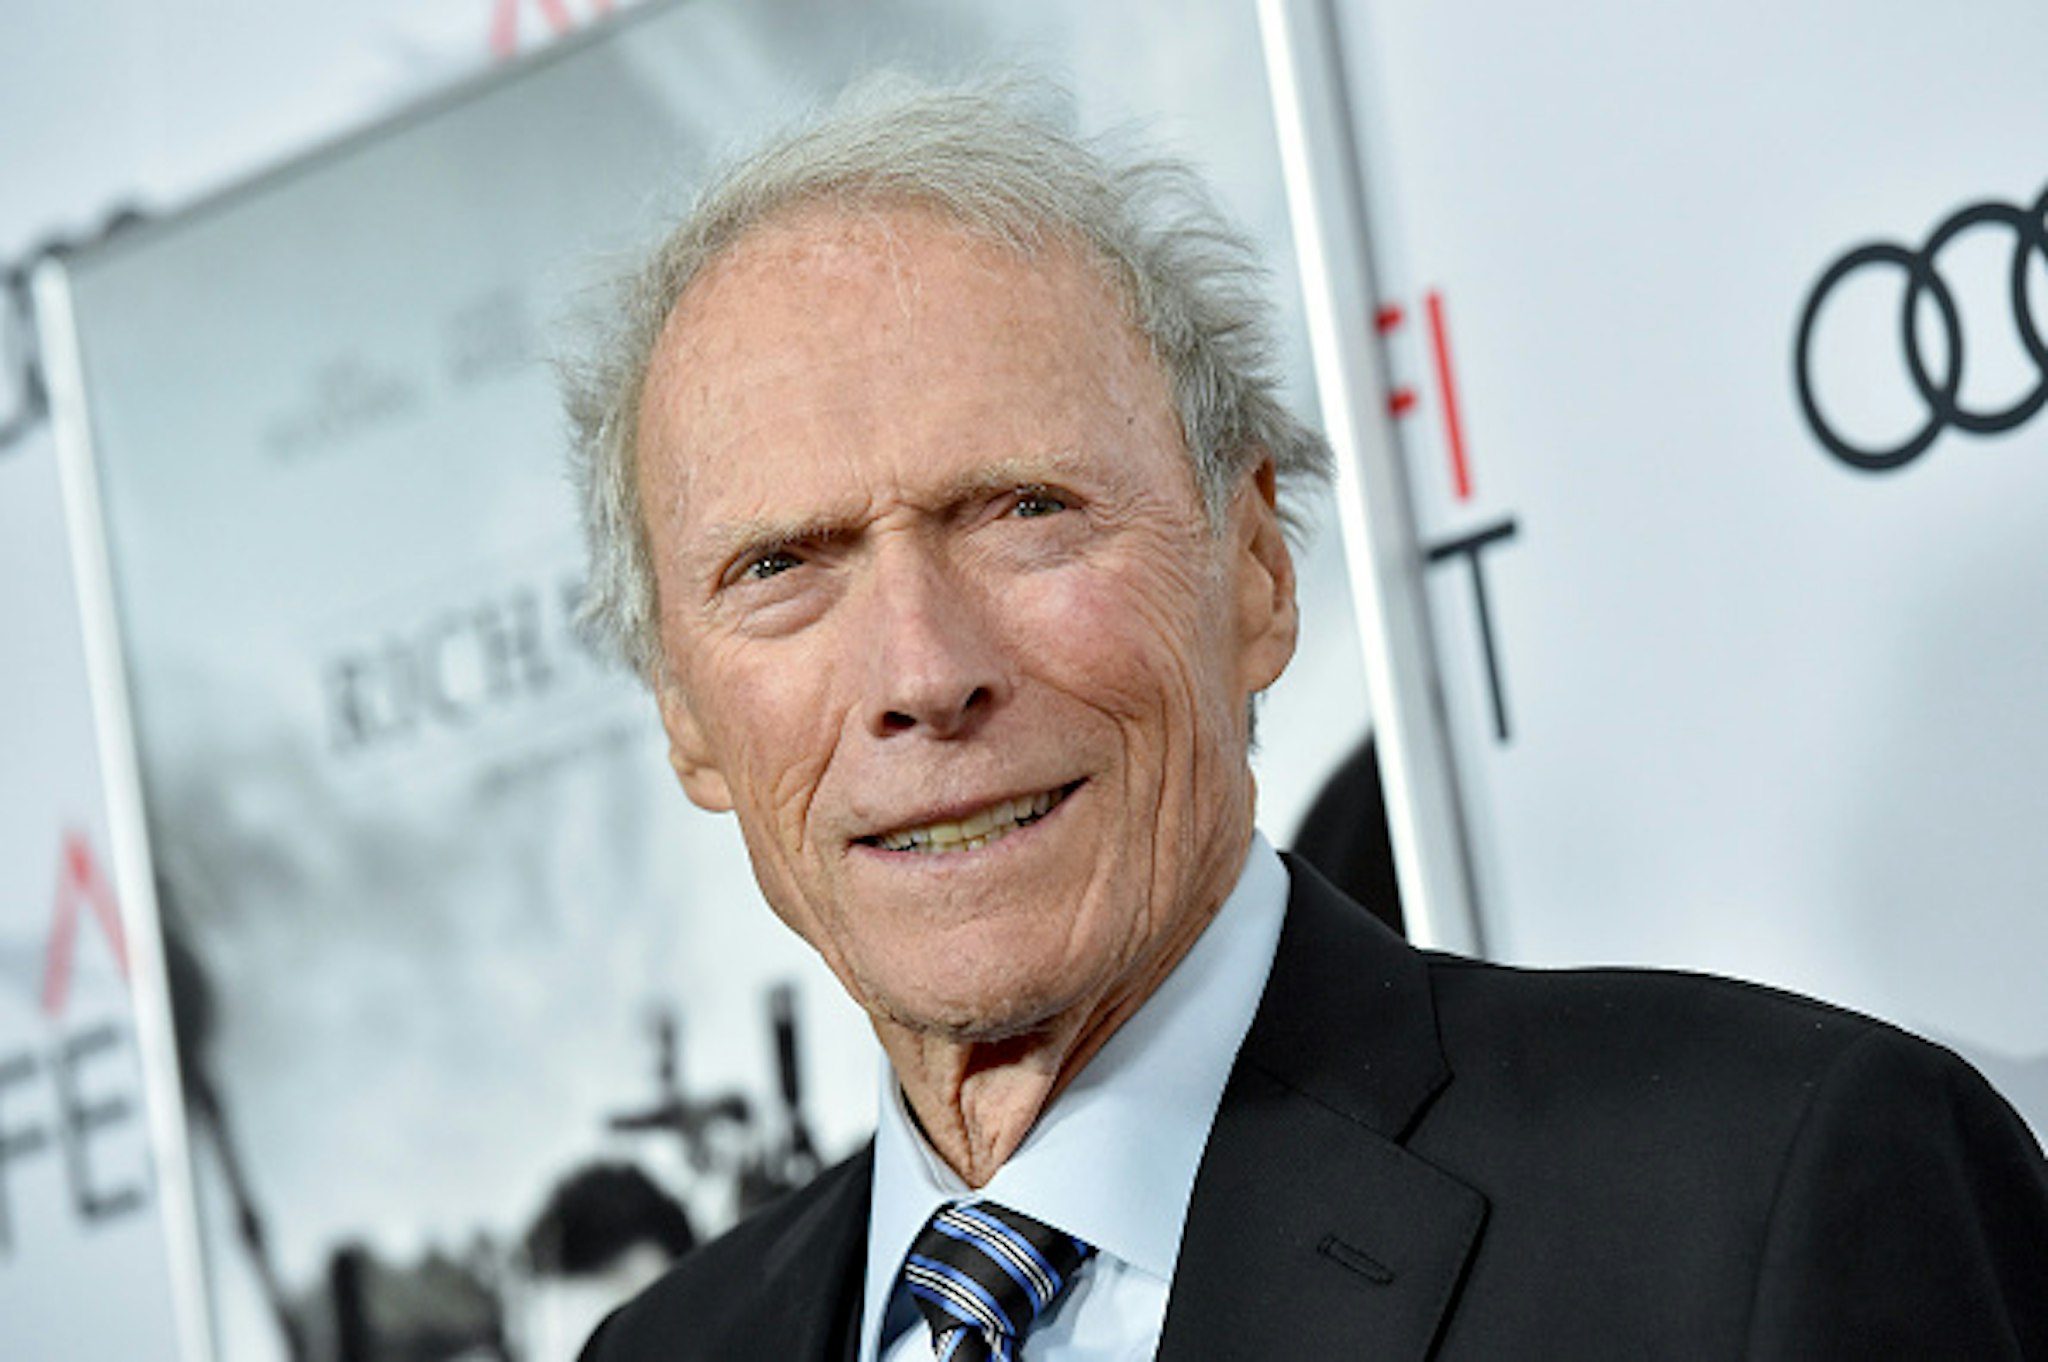 HOLLYWOOD, CALIFORNIA - NOVEMBER 20: Clint Eastwood attends the premiere of "Richard Jewell" during AFI FEST 2019 presented by Audi at TCL Chinese Theatre on November 20, 2019 in Hollywood, California.